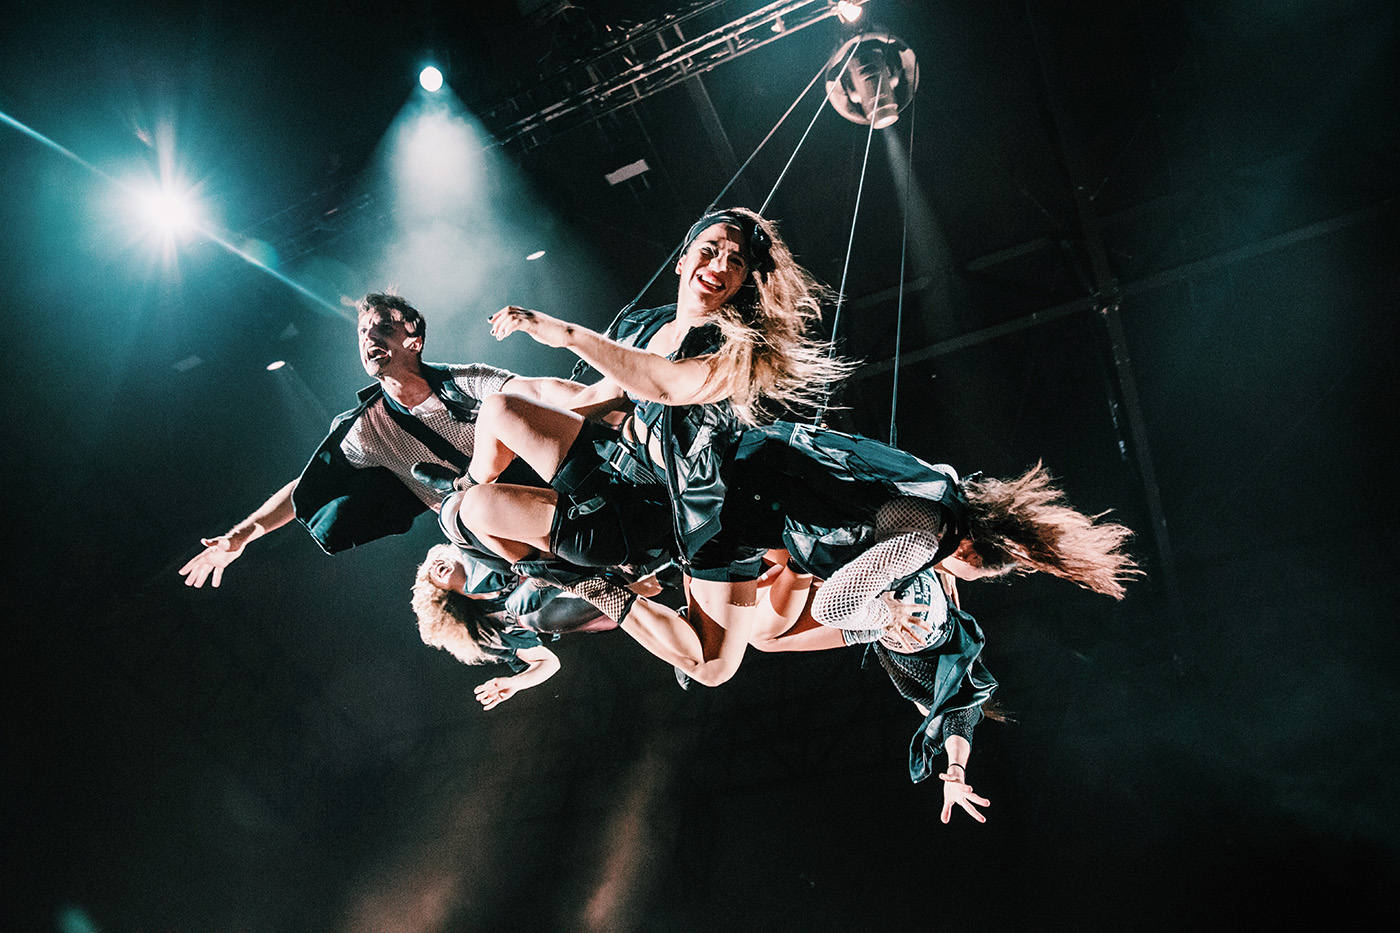 Fuerza Bruta at Singapore Night Festival 2019 - 15 flying group